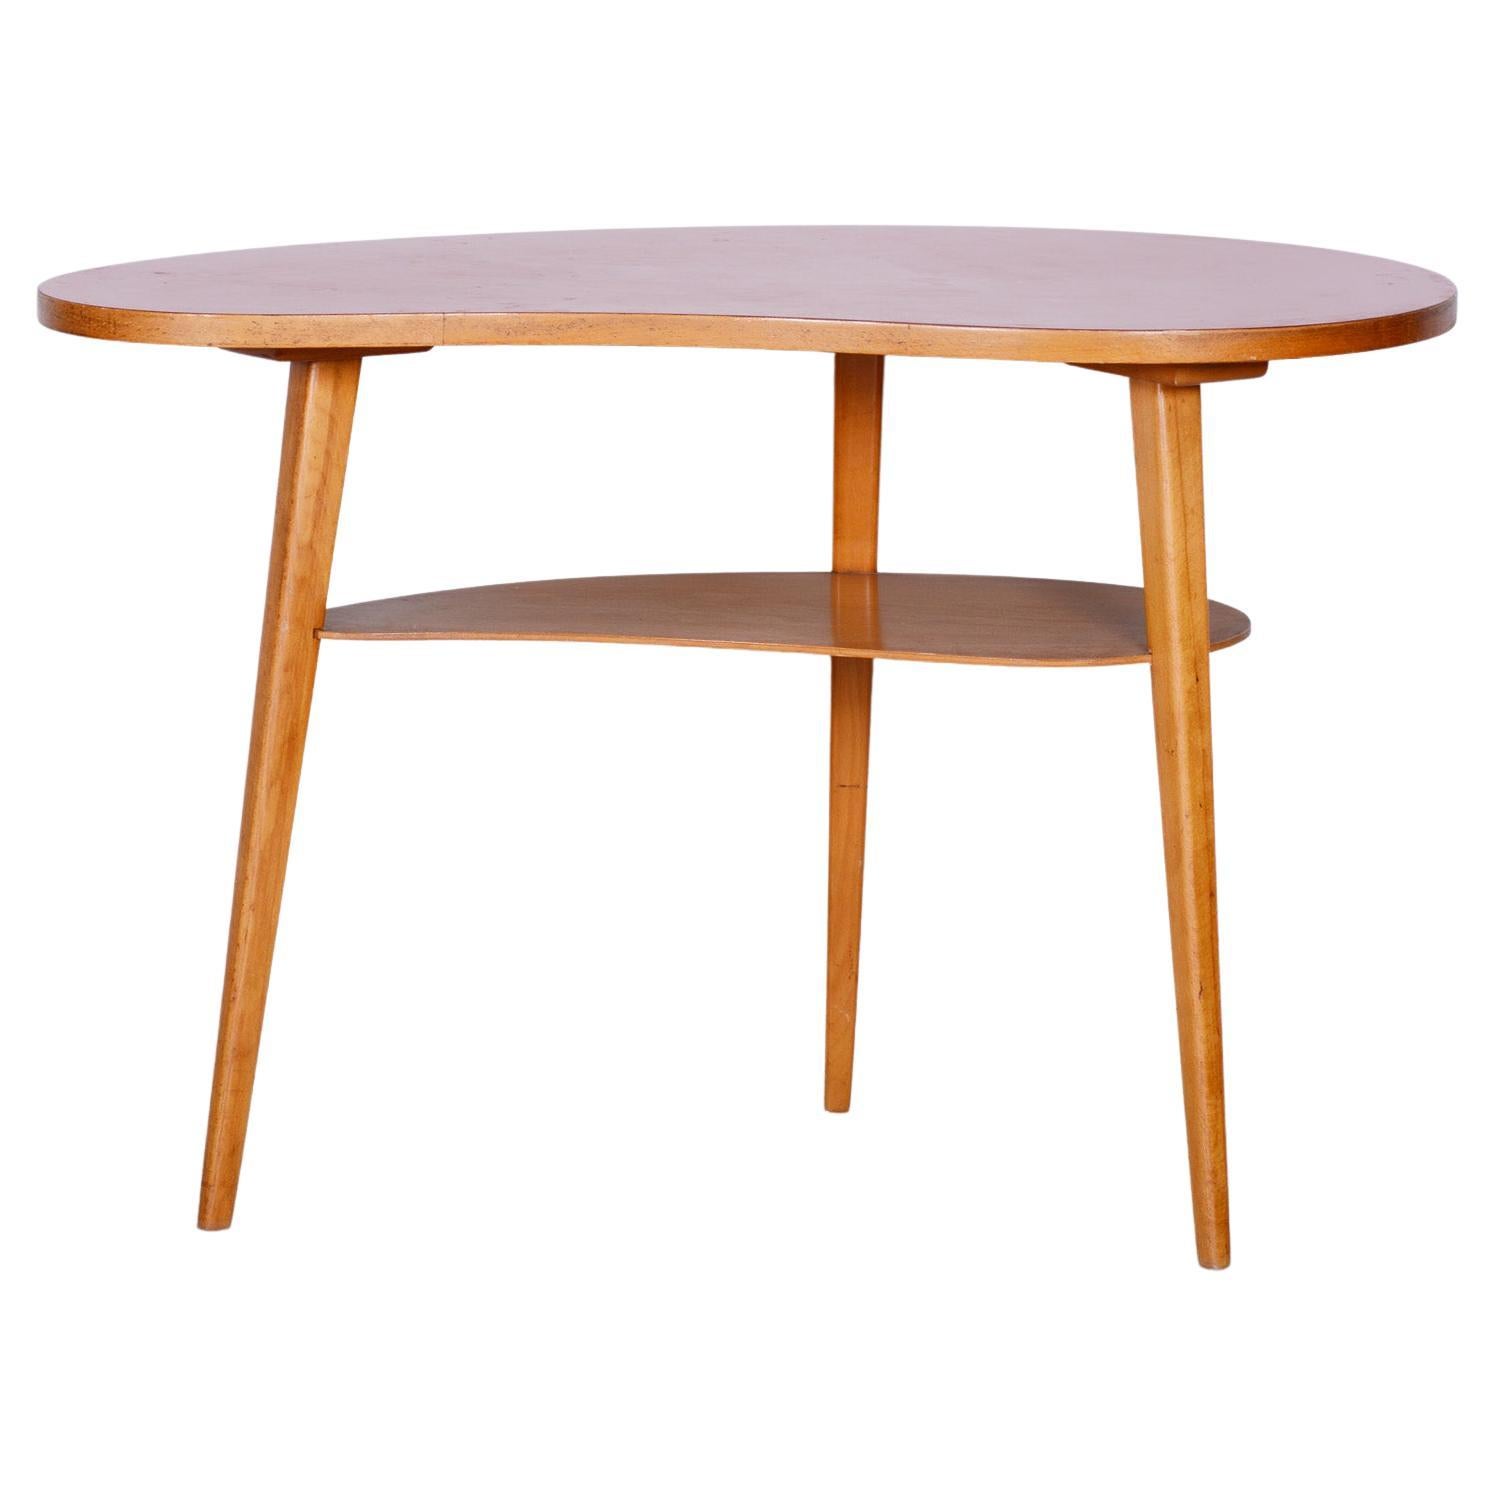 Small Beech Table, Czech Midcentury, Preserved in Original Condition, 1950s